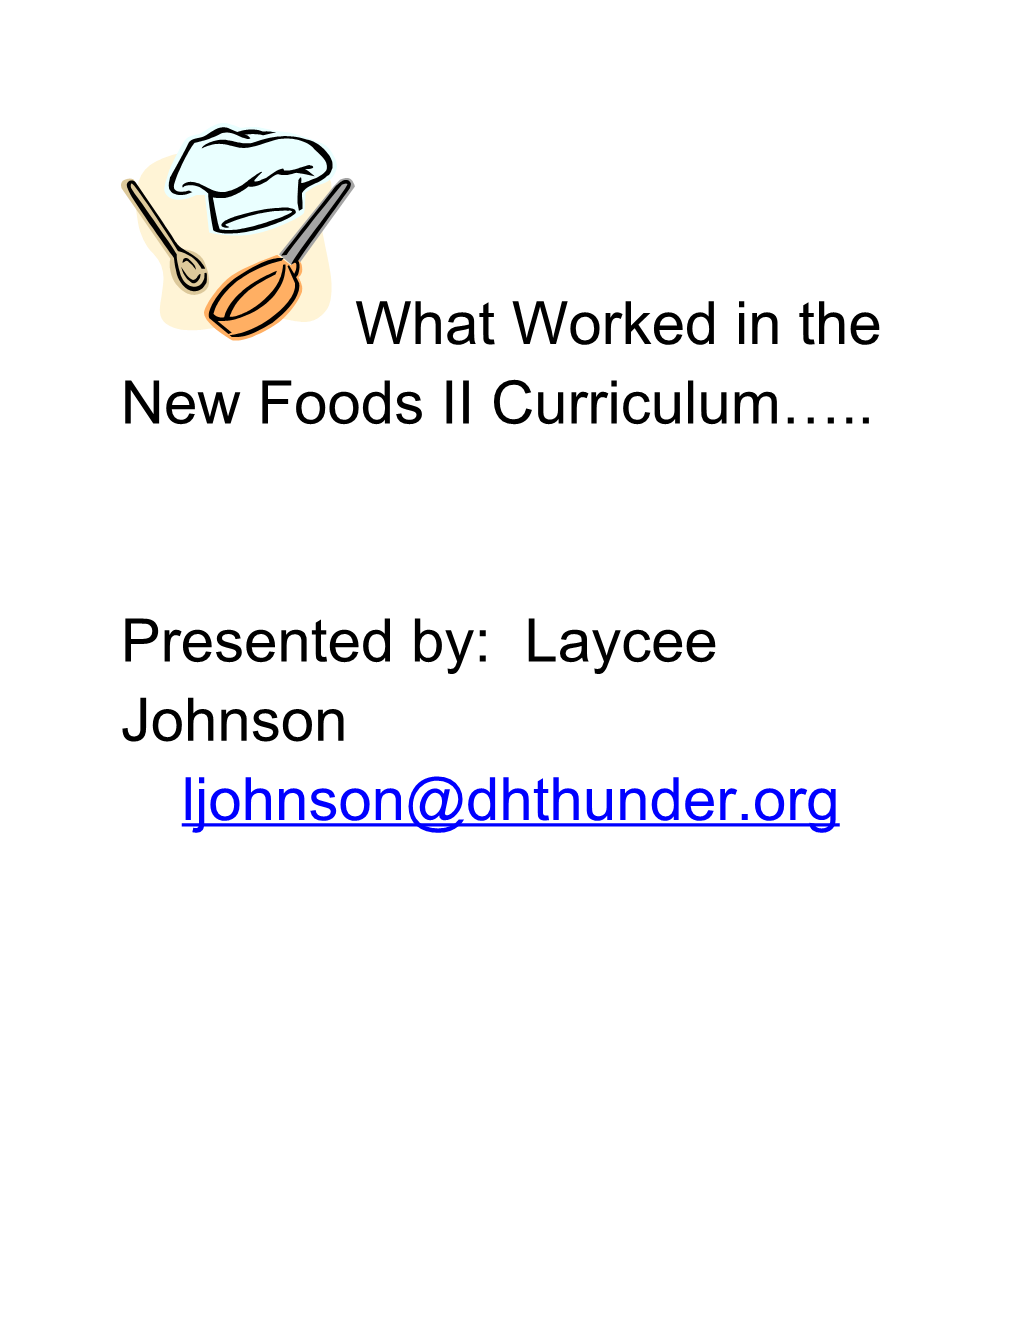 What Worked in the New Foods II Curriculum